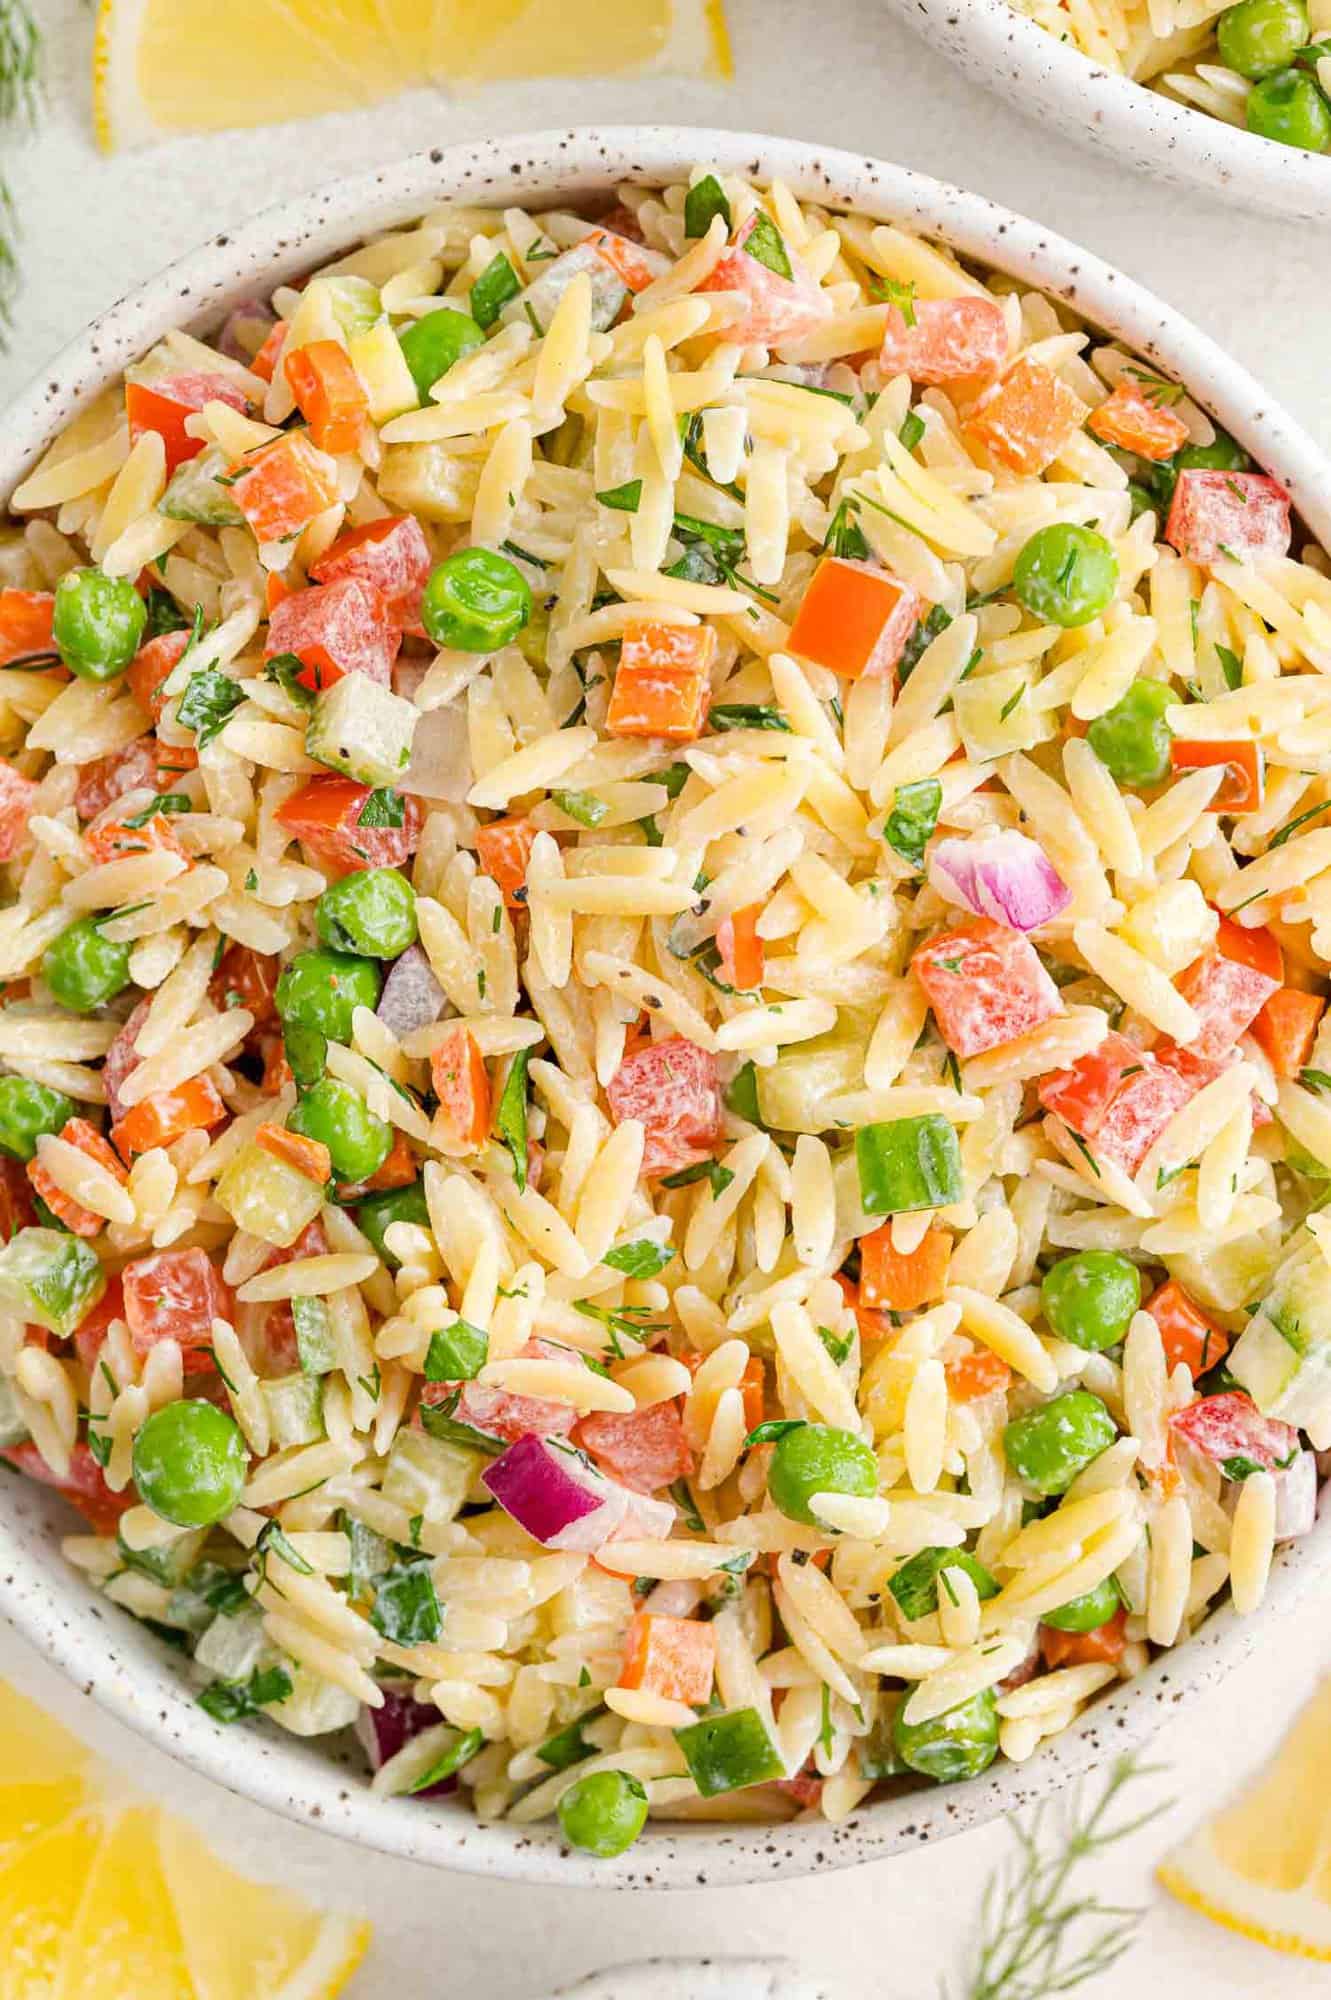 Overhead view of orzo salad with yogurt dill dressing with a variety of vegetables.